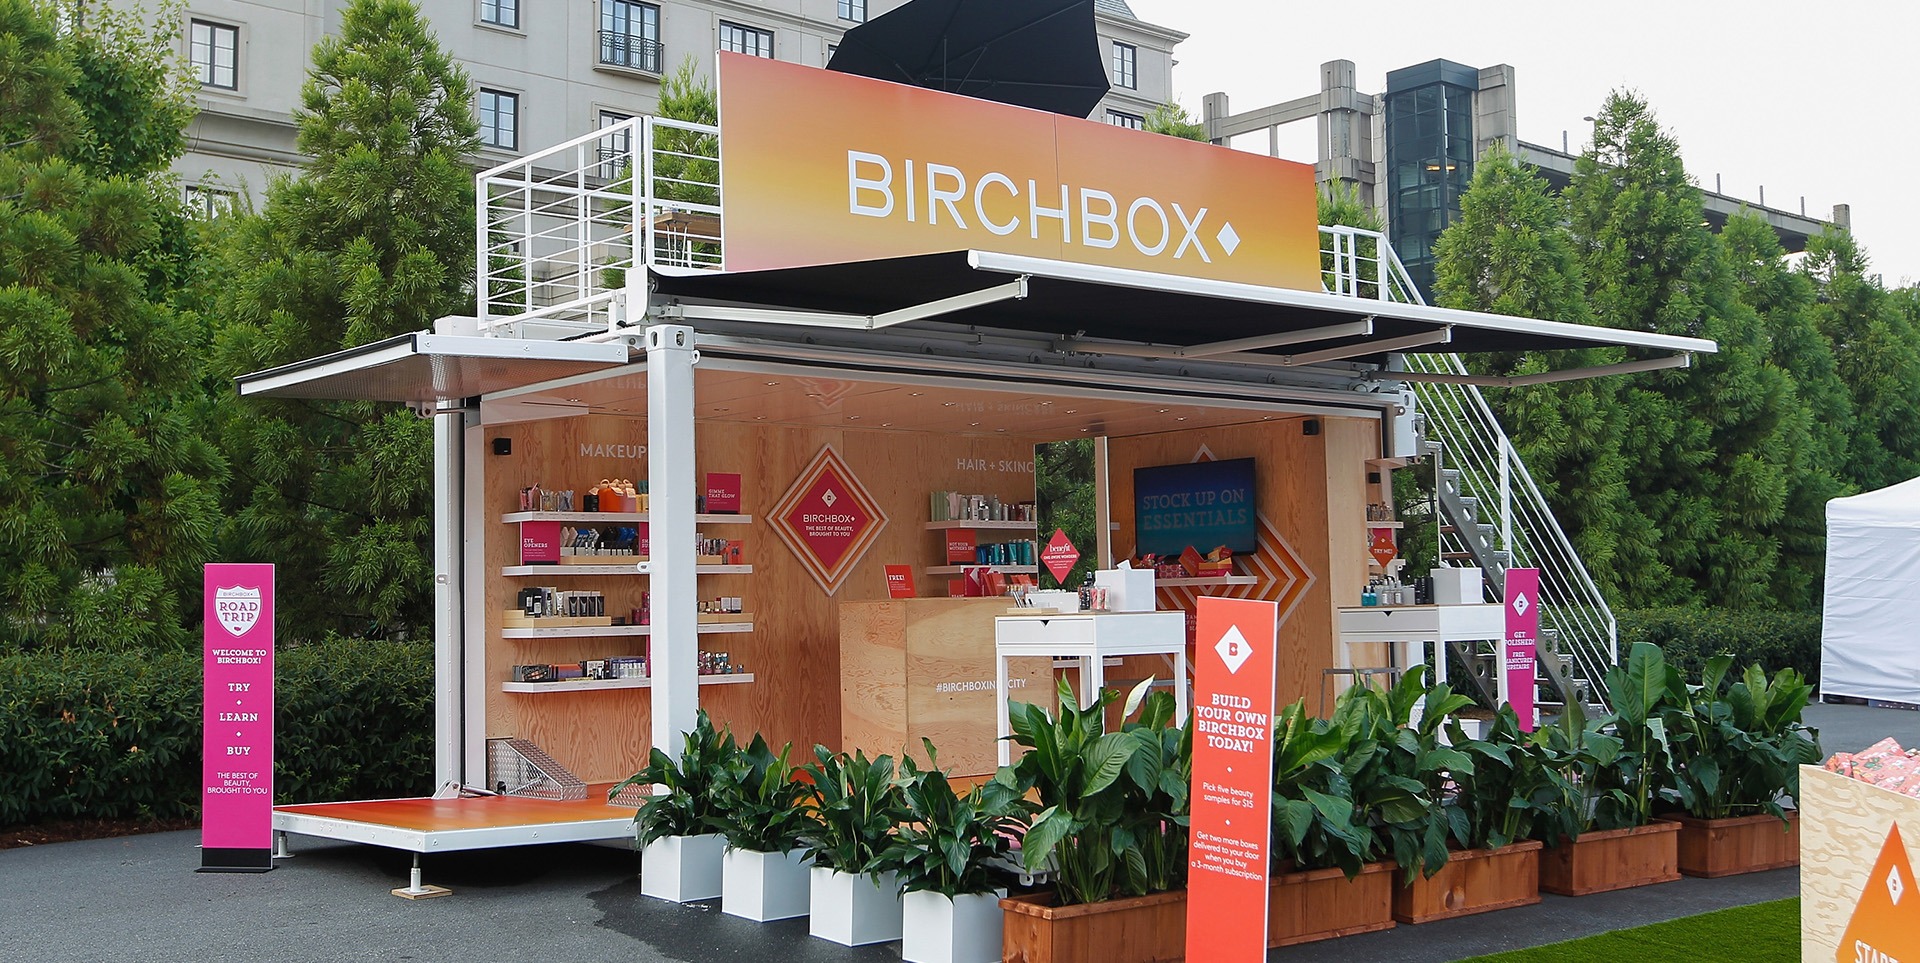 5 Reasons Branded Container Pop-Up Stores Make Killer Marketing